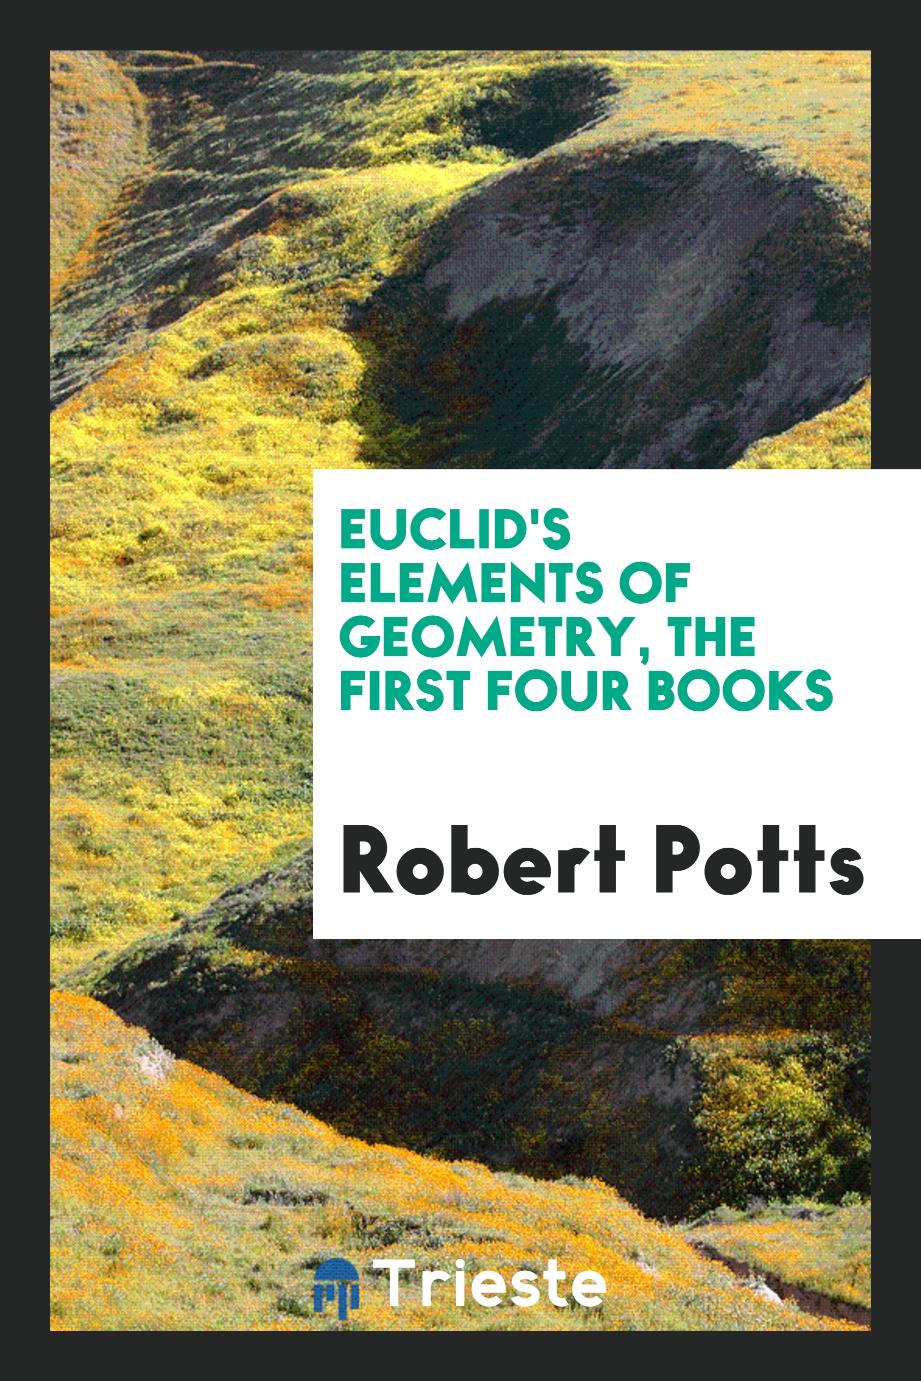 Euclid's Elements of Geometry, the First Four Books